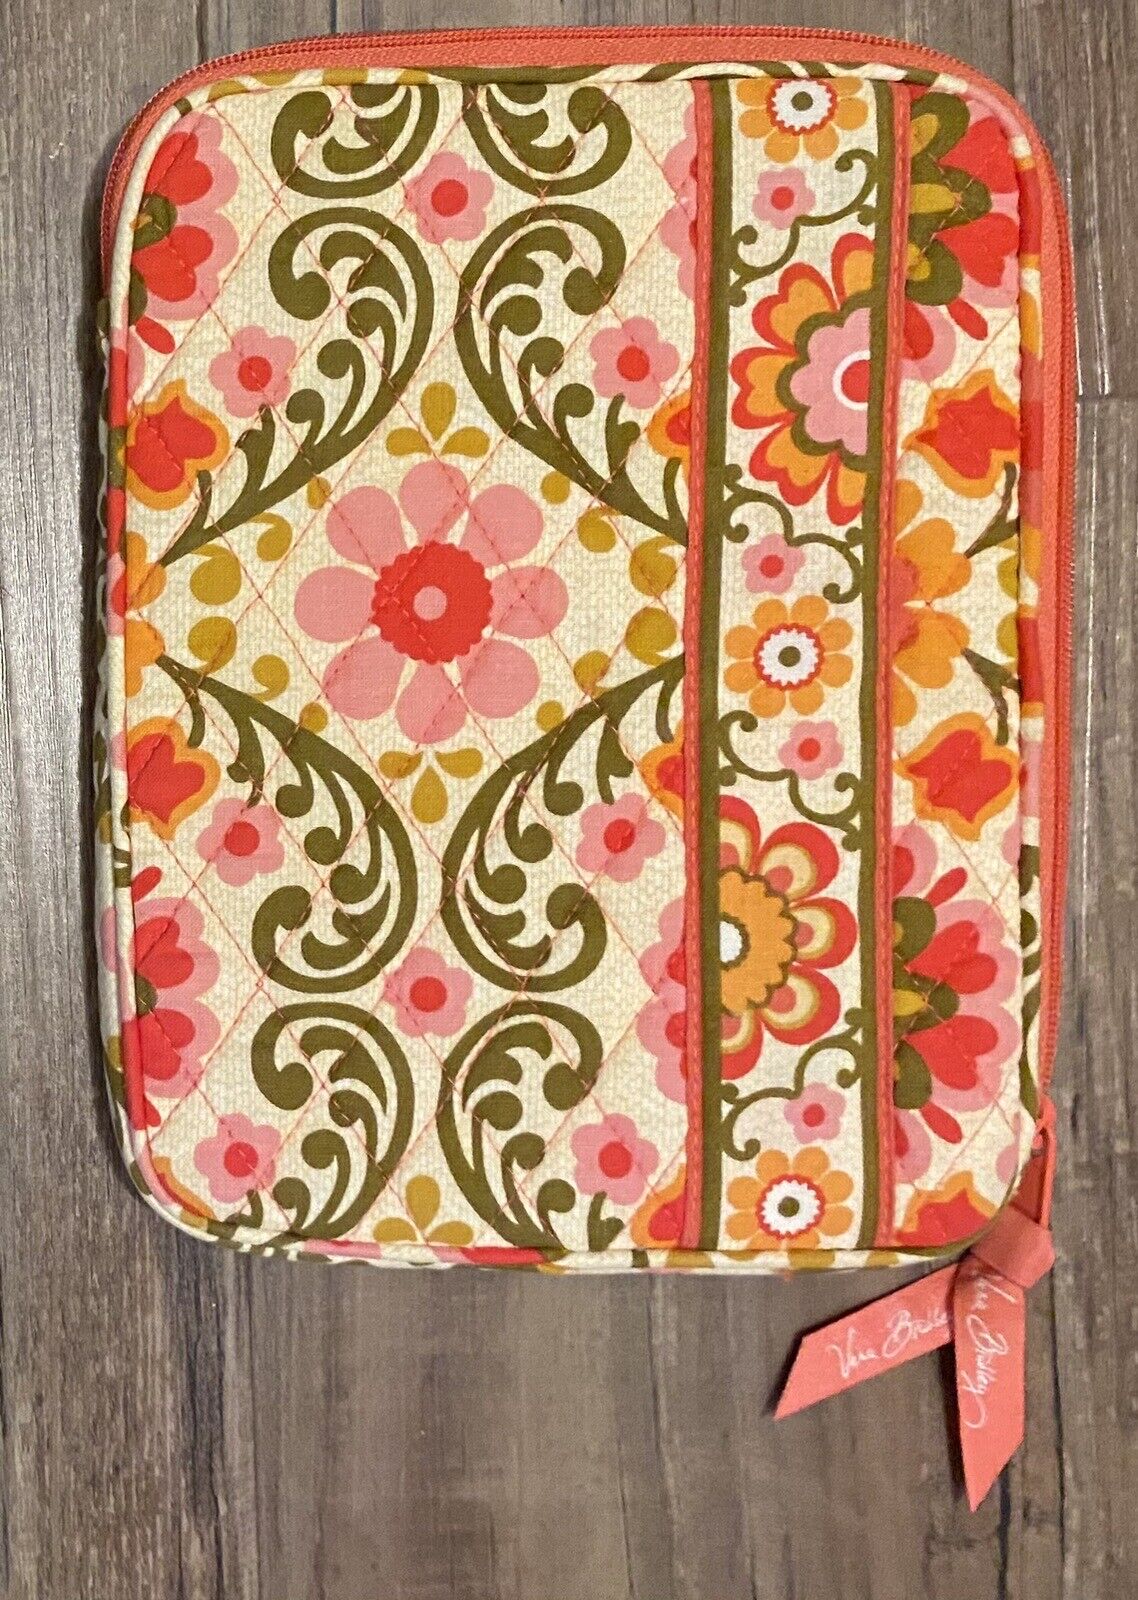 VERA BRADLEY Folkloric Tablet Ipad E Reader Quilted Padded Book Case Sleeve